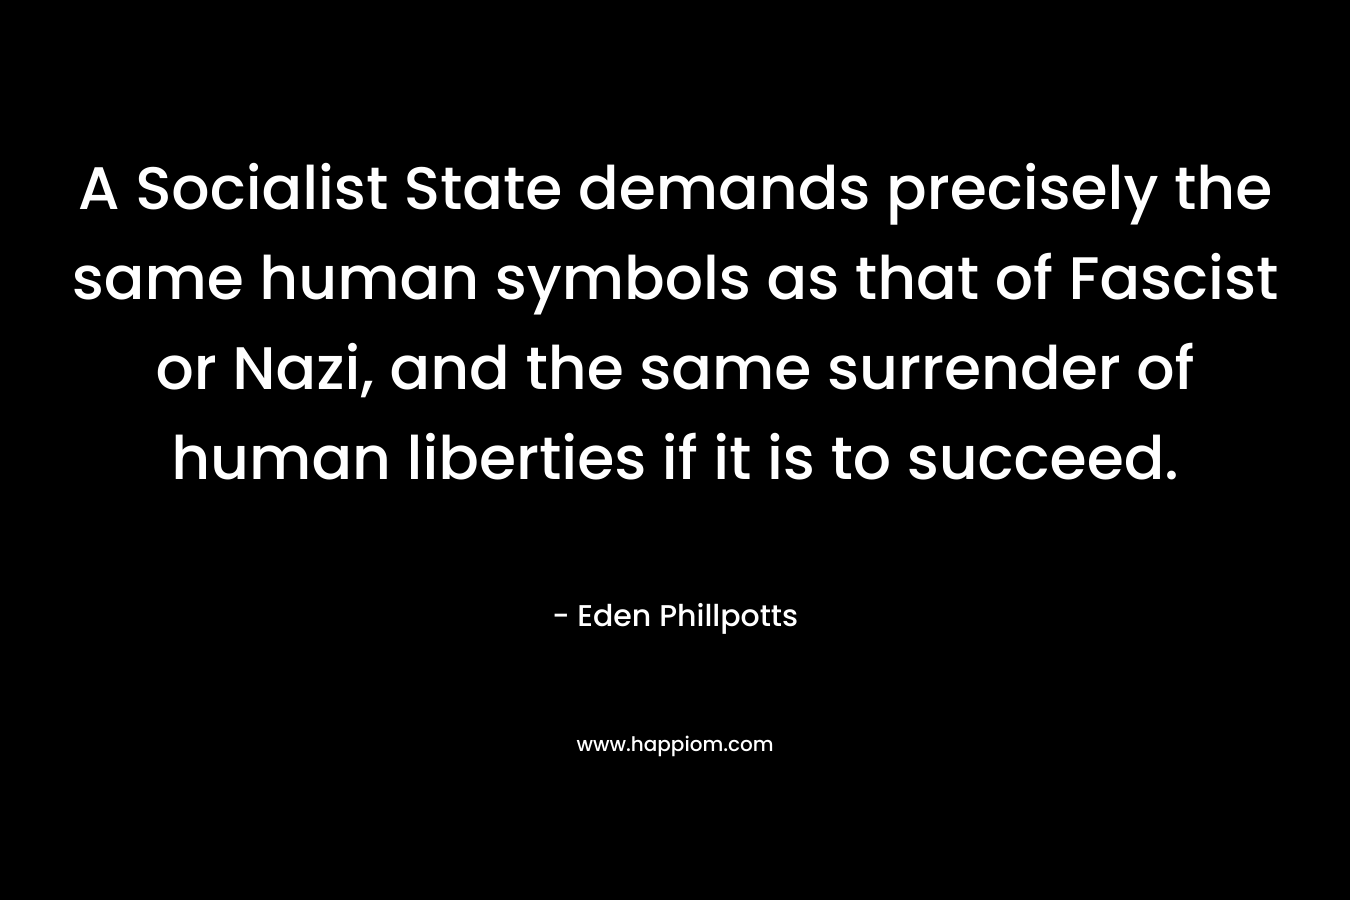 A Socialist State demands precisely the same human symbols as that of Fascist or Nazi, and the same surrender of human liberties if it is to succeed.